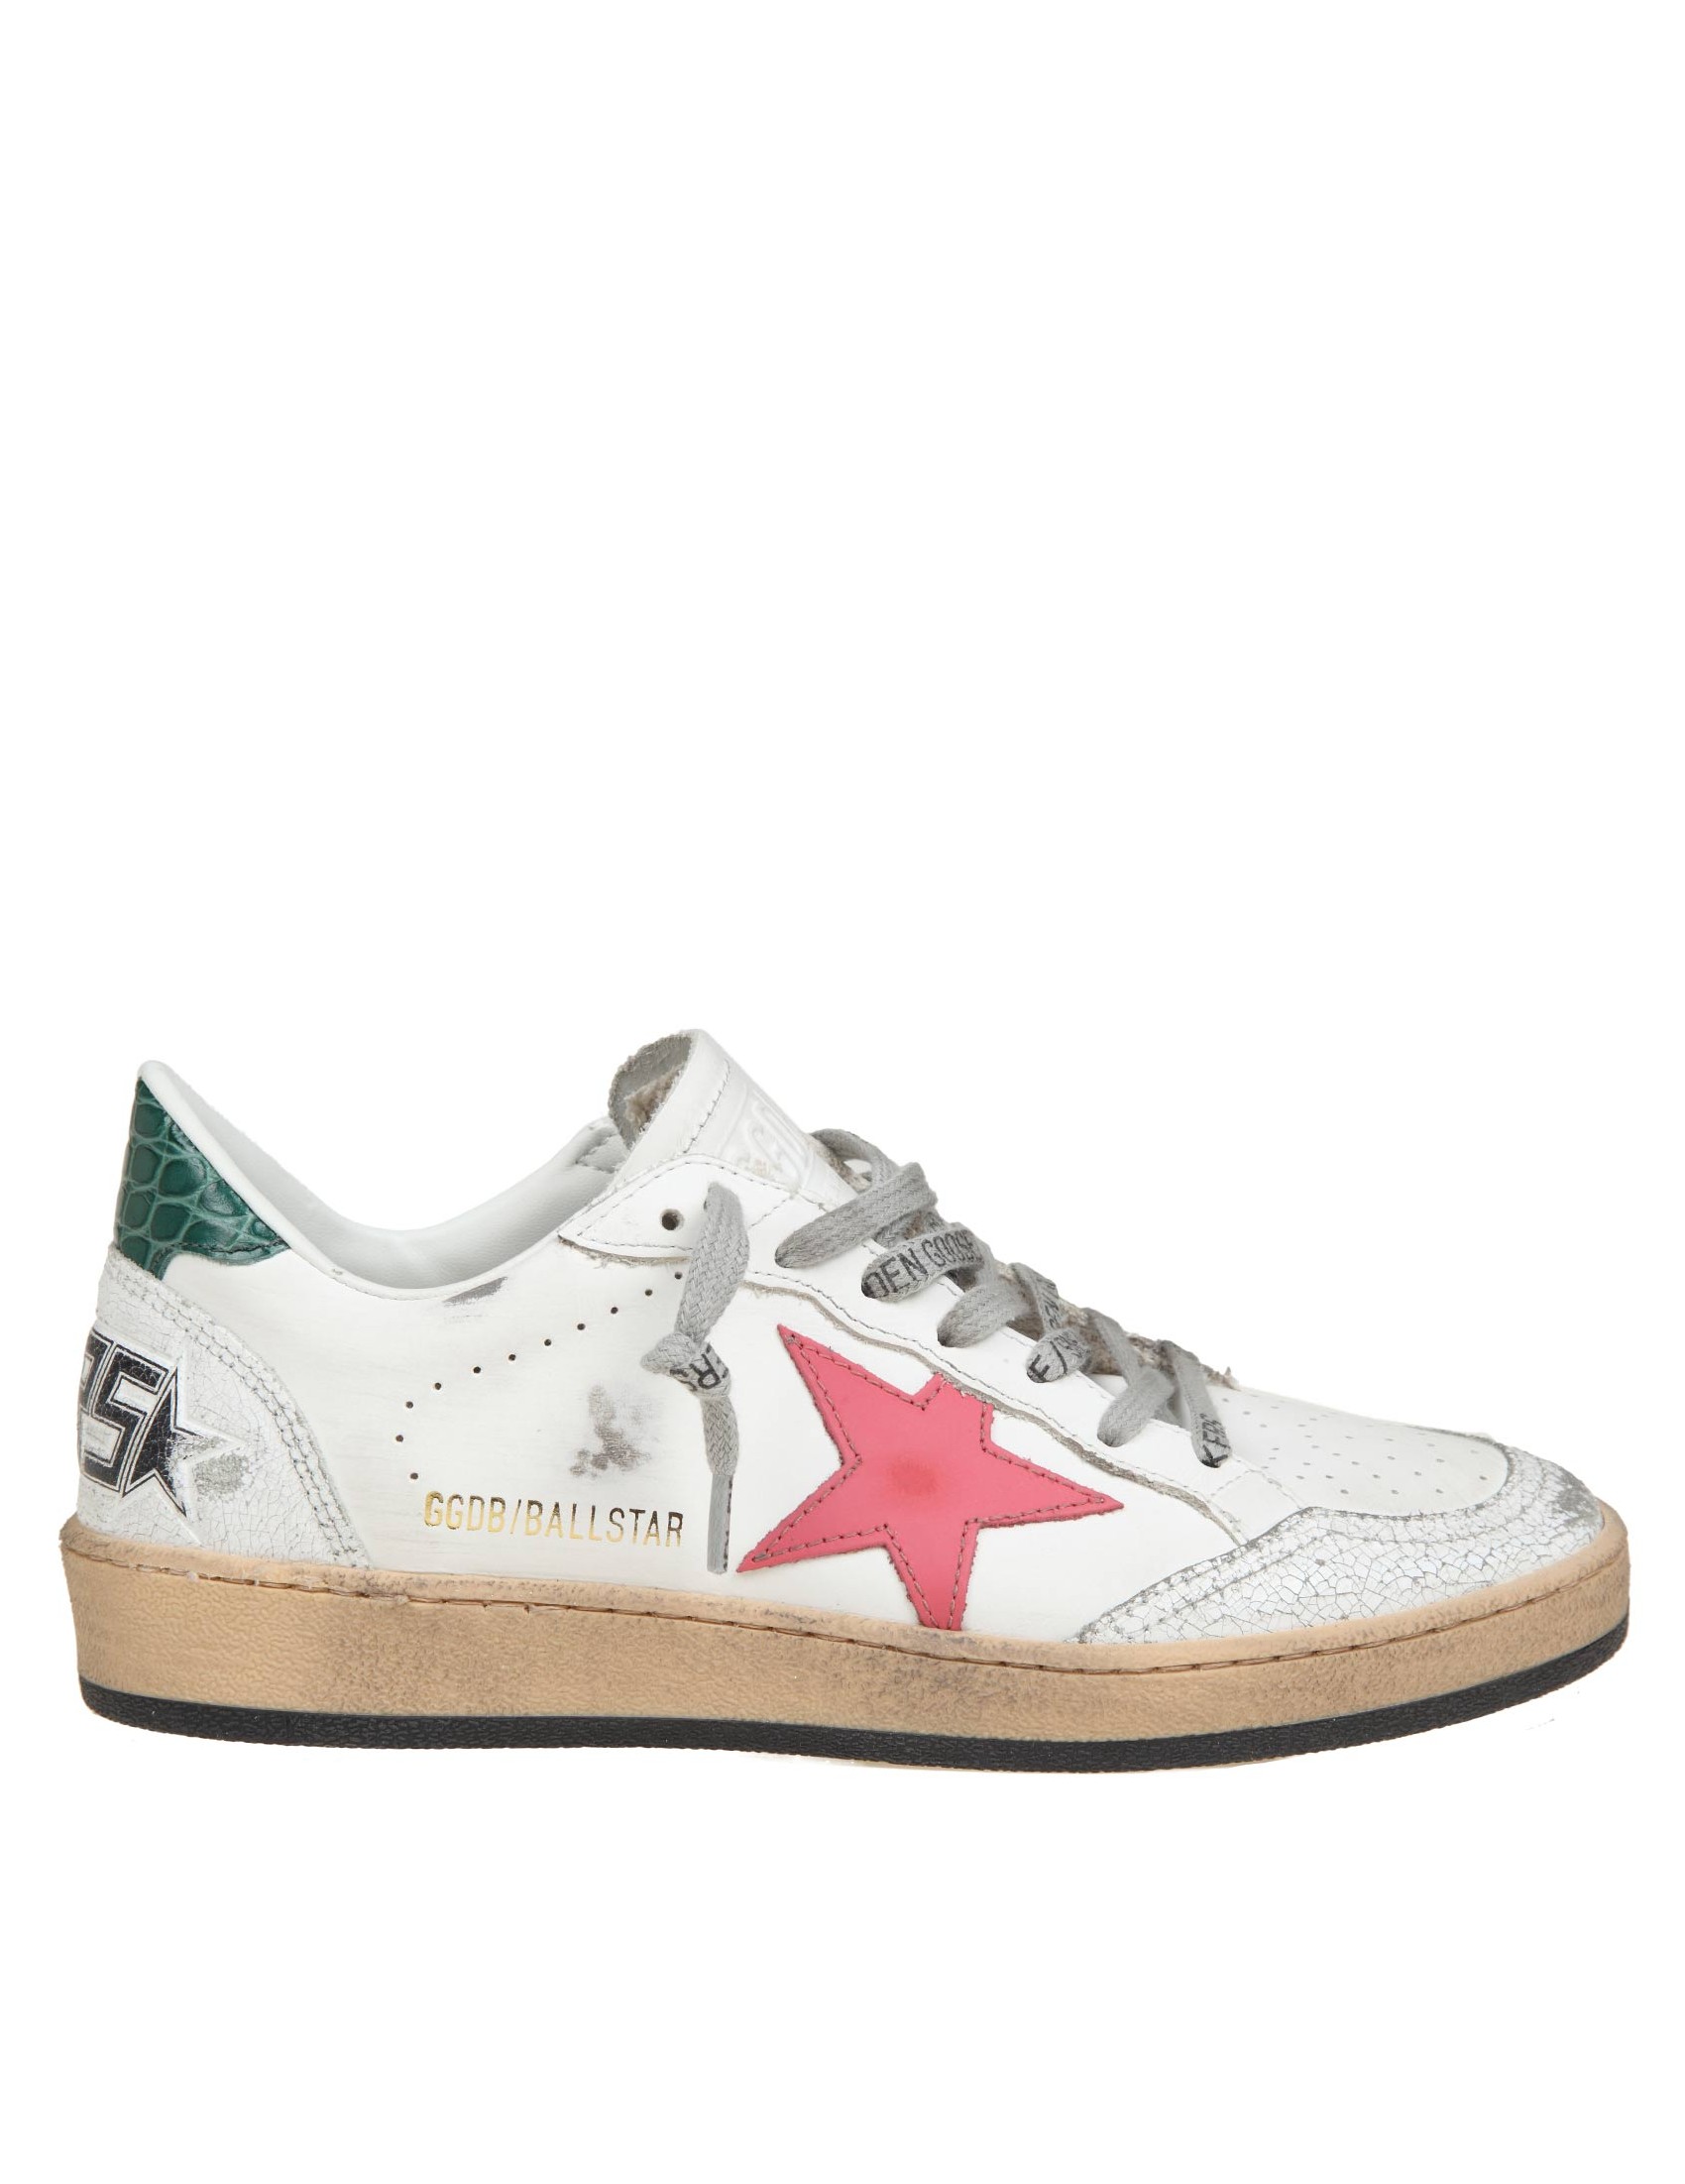 GOLDEN GOOSE BALLSTAR IN WHITE AND PINK LEATHER